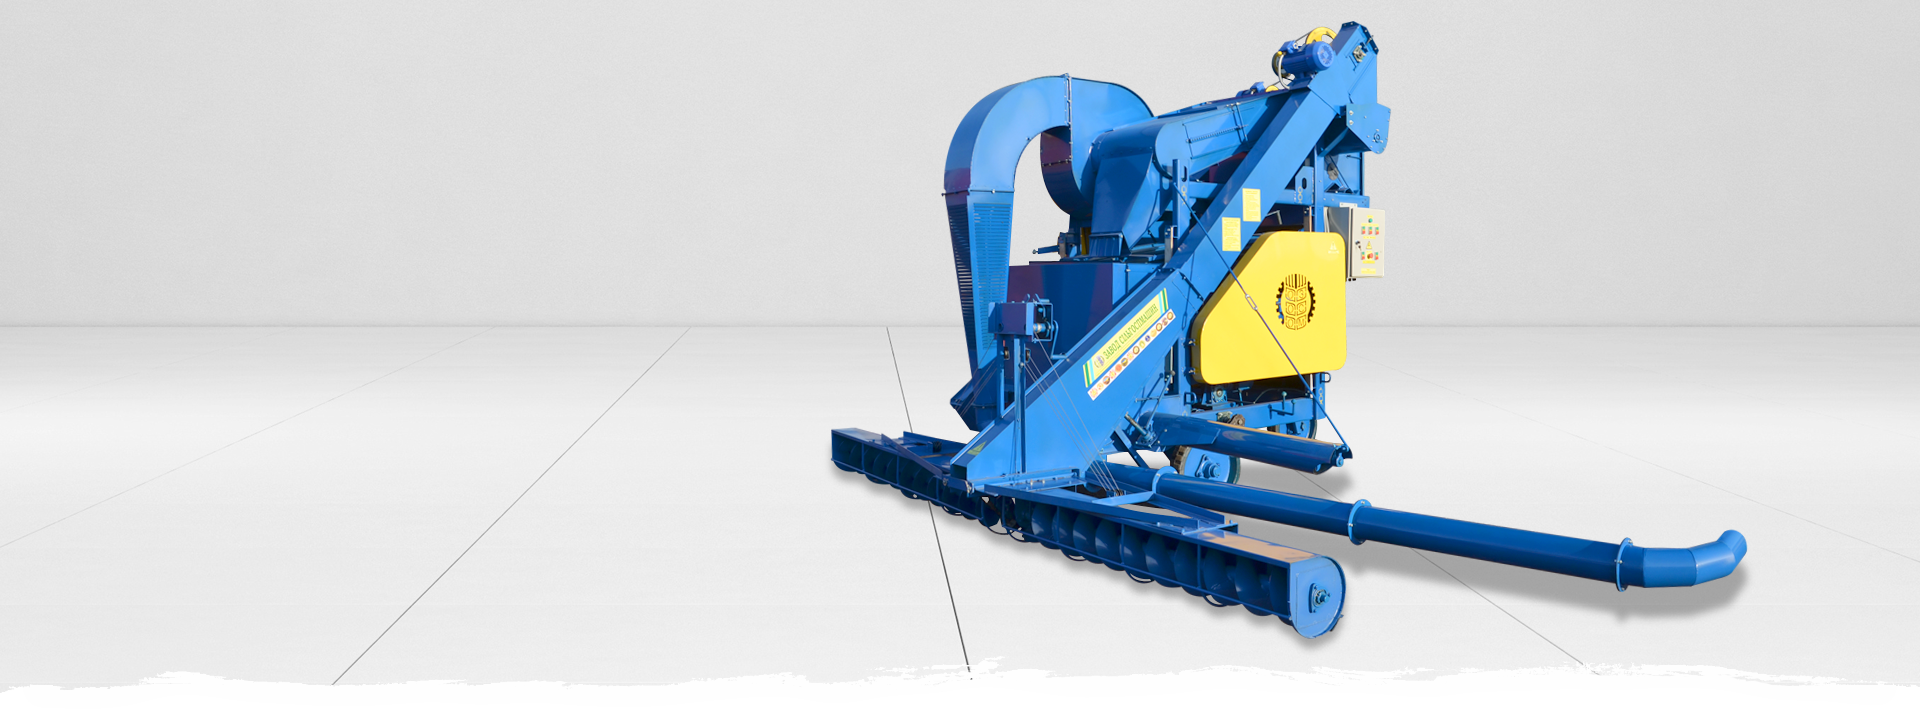 OBC-25 self-propelled grain cleaning machine, photo